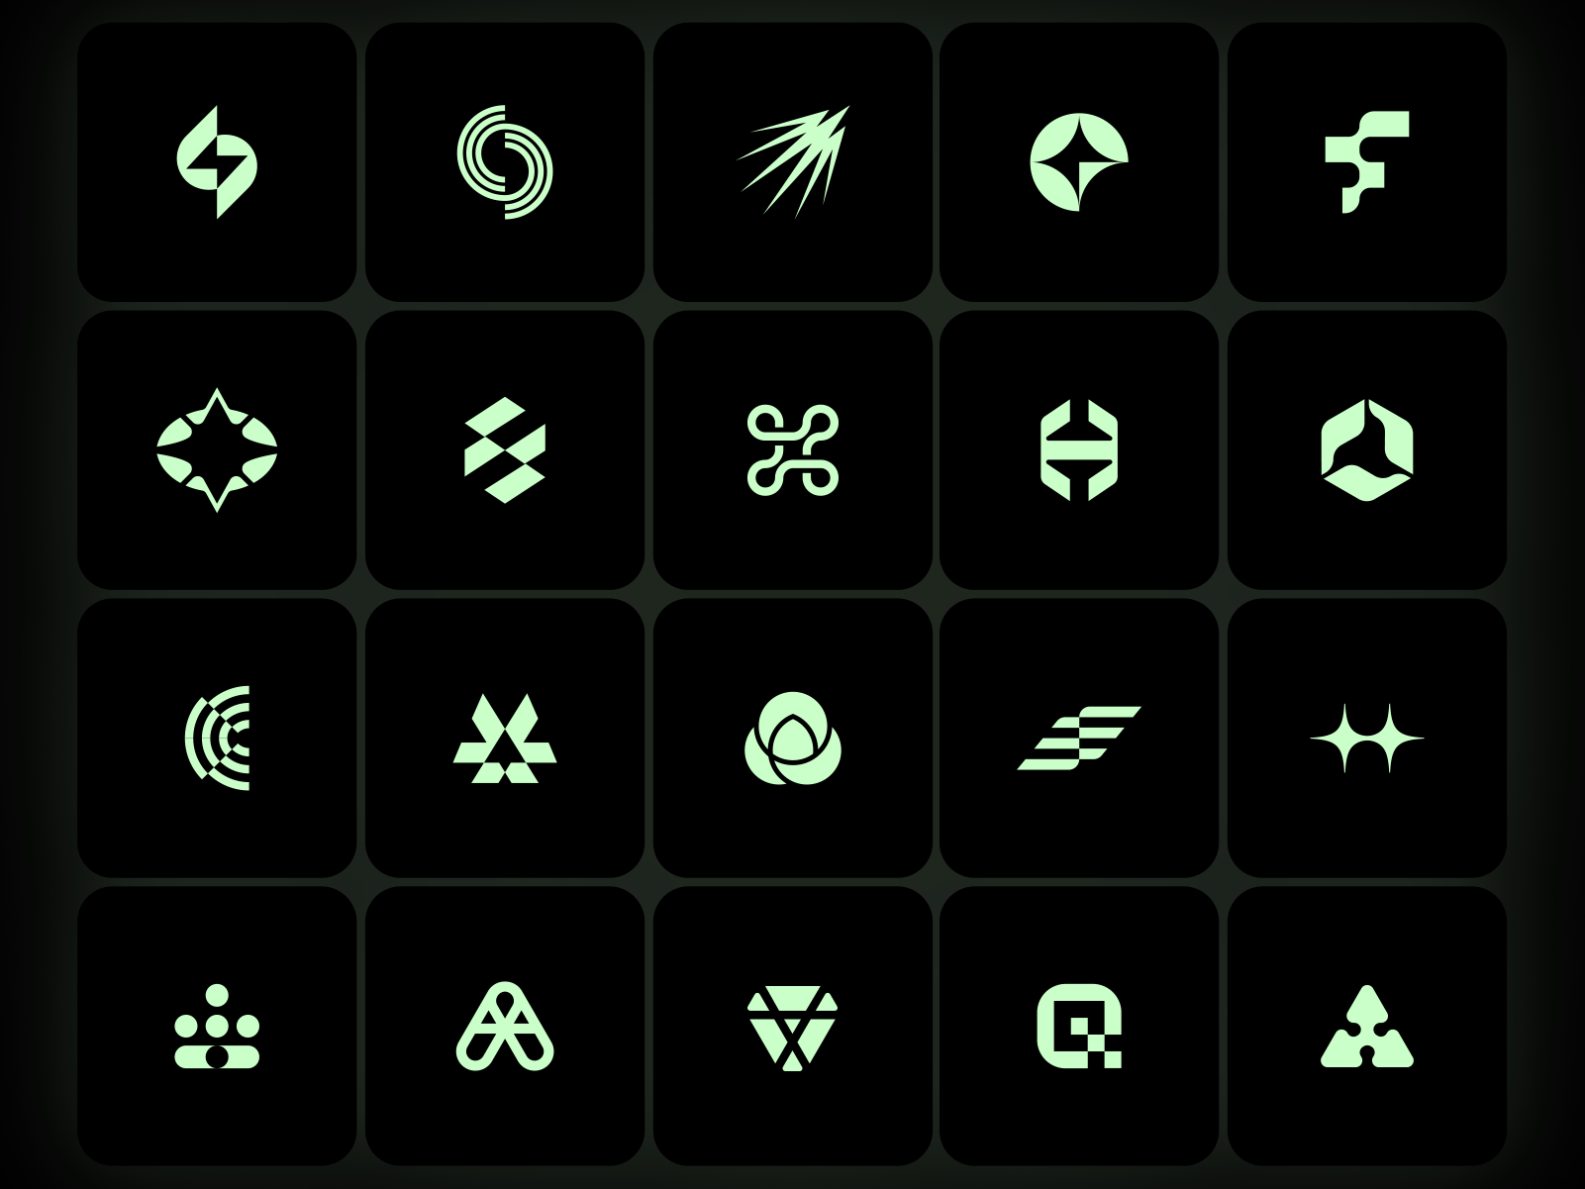 Abstract Marks & Symbols by Sergii Snurnyk on Dribbble